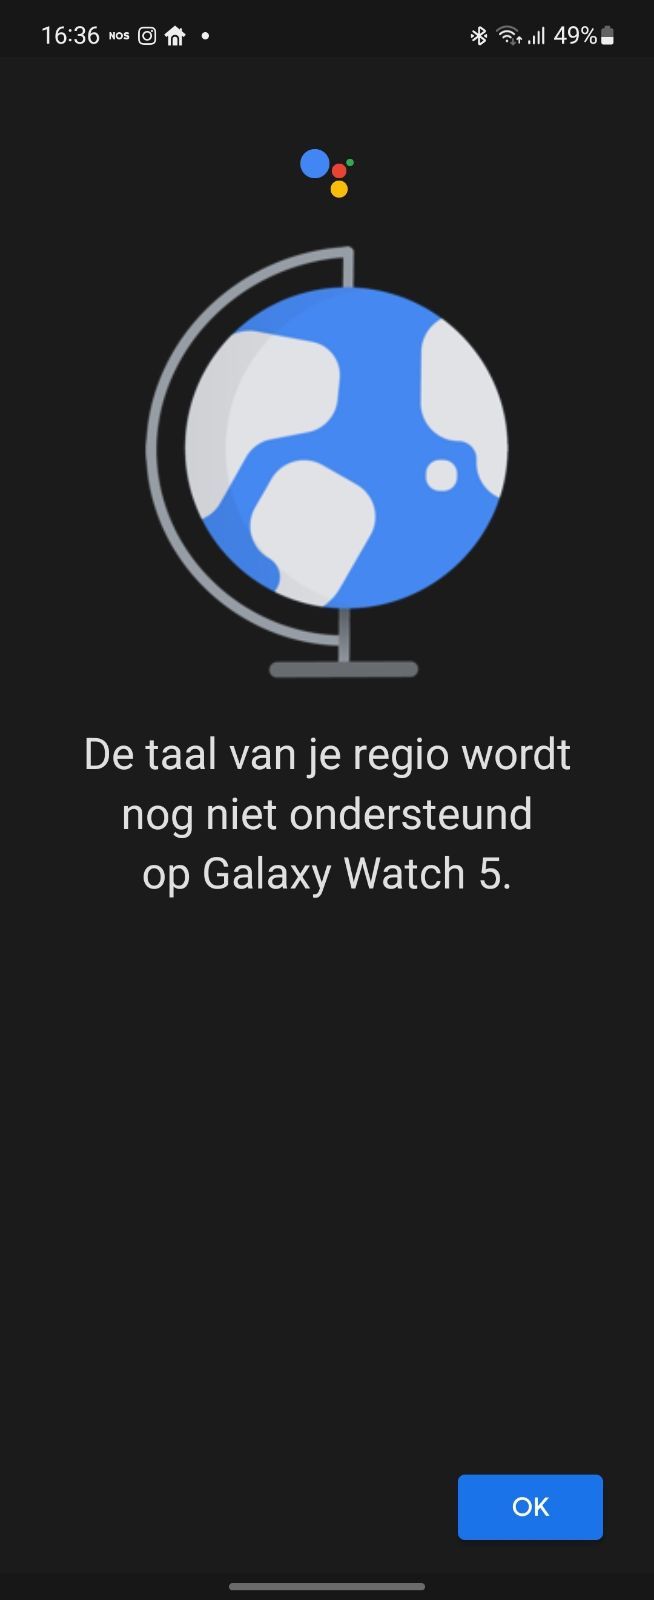 Samsung Galaxy Watch 5: this is how you get the Dutch Google Assistant working